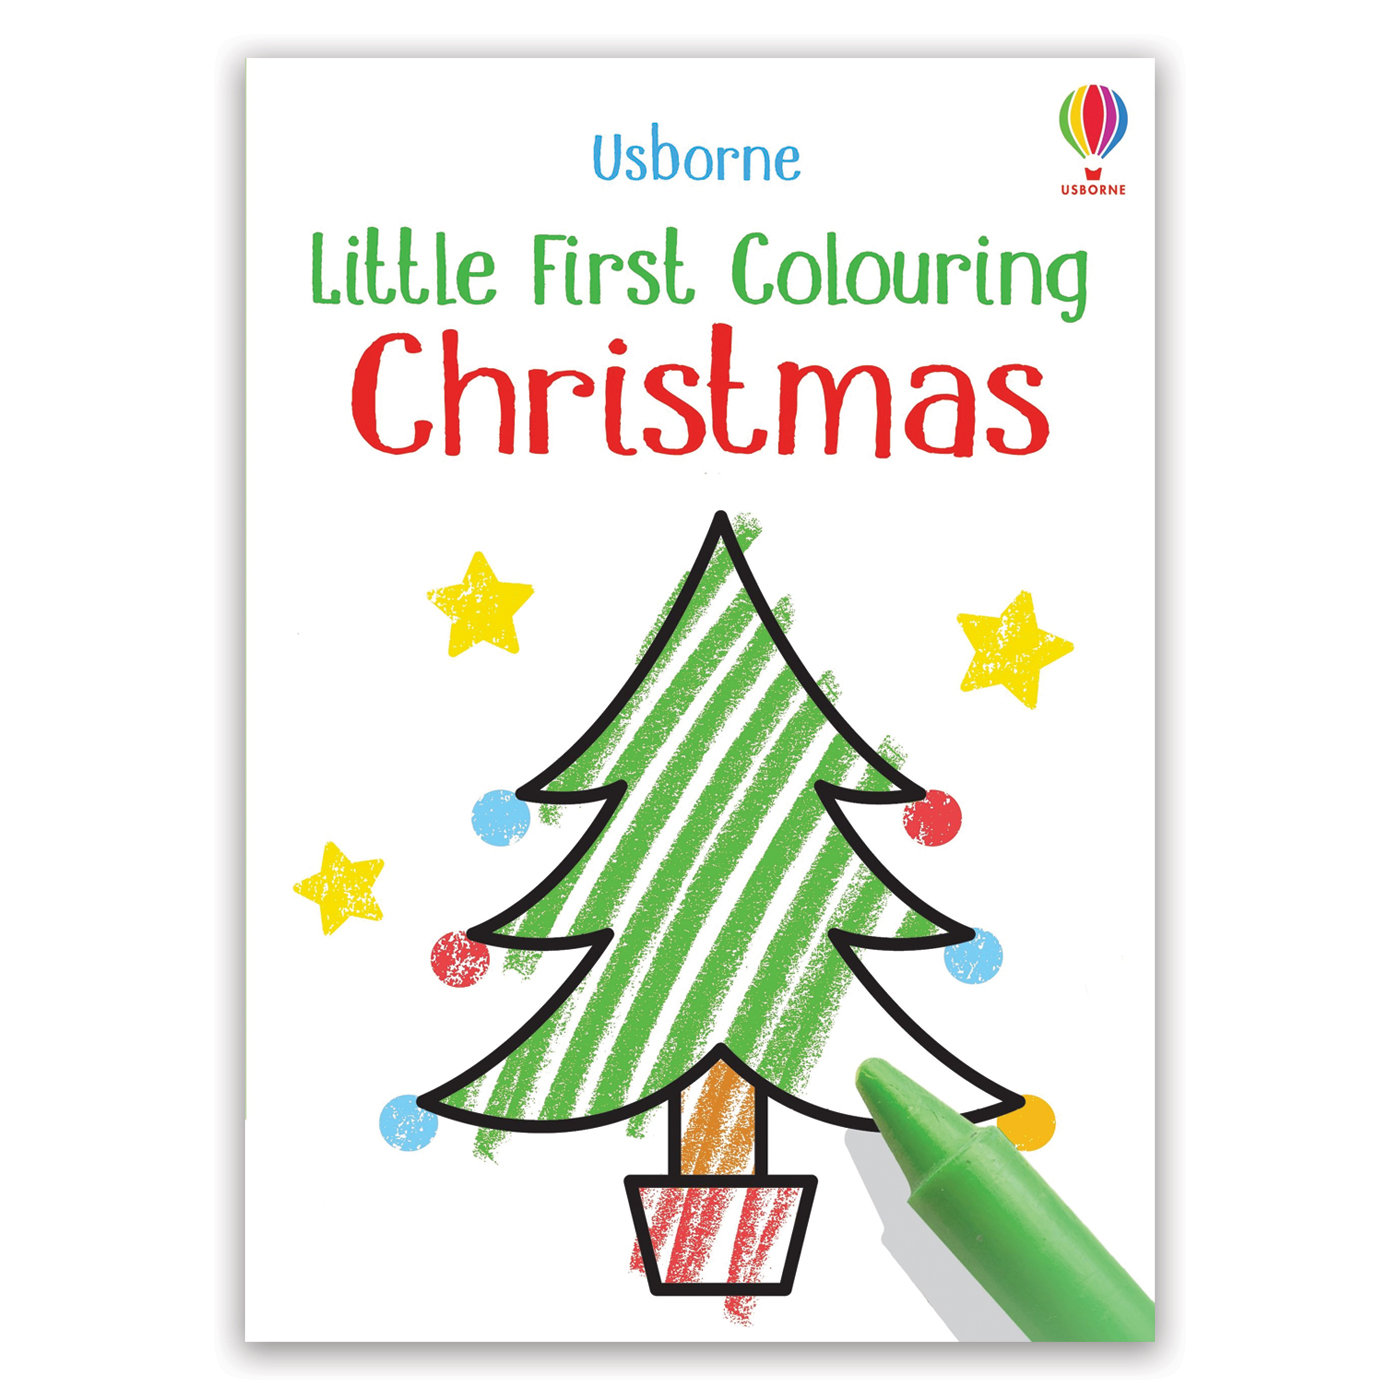  Little First Colouring Christmas